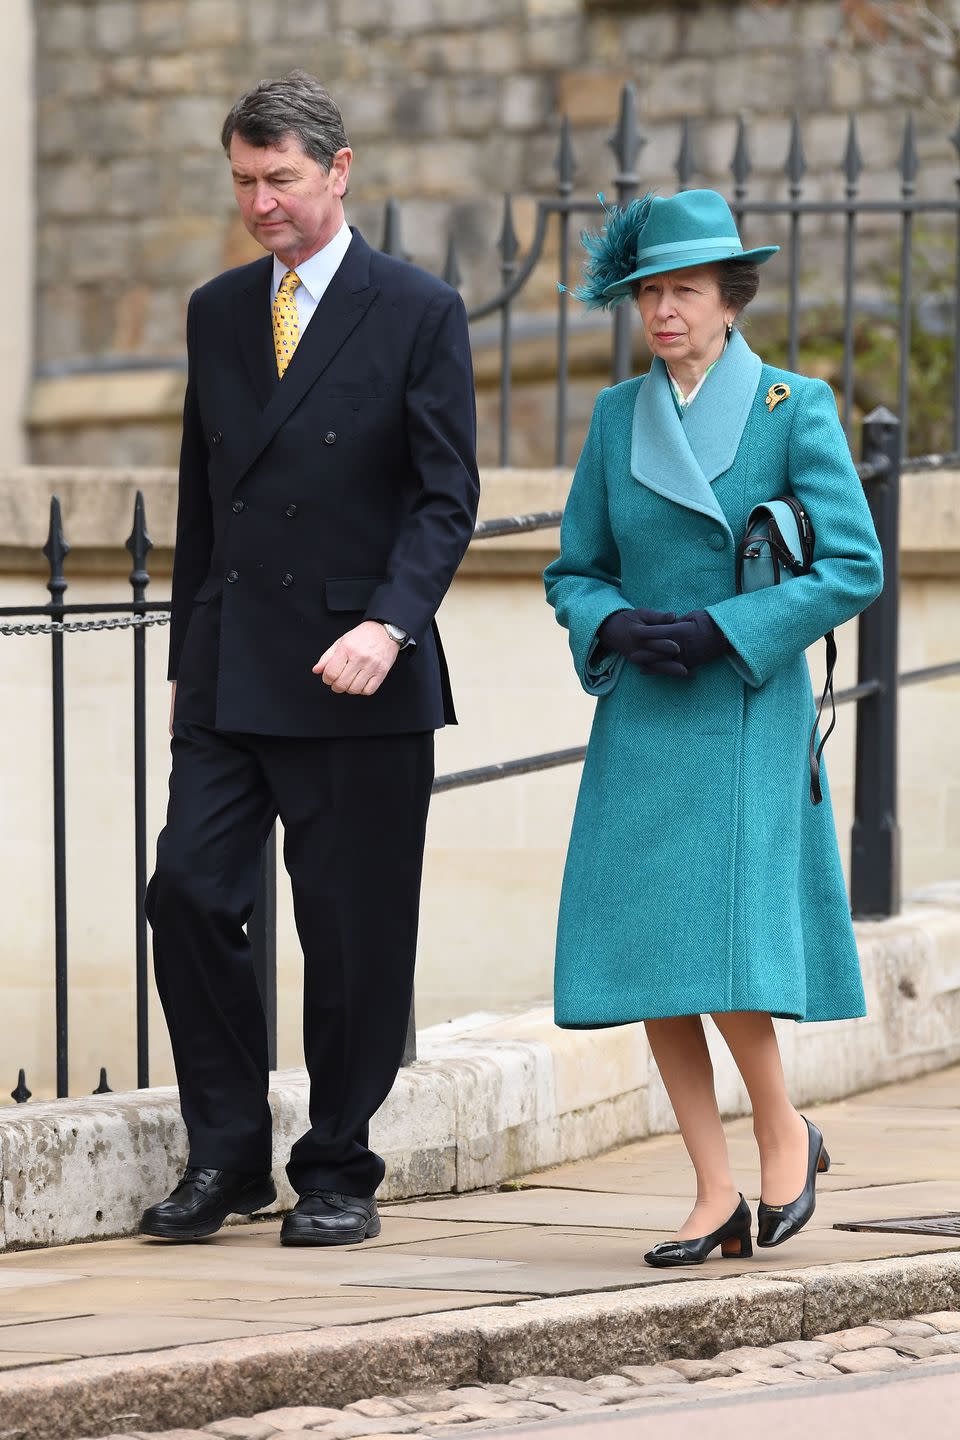 1) Princess Anne and Vice Admiral Sir Timothy Laurence